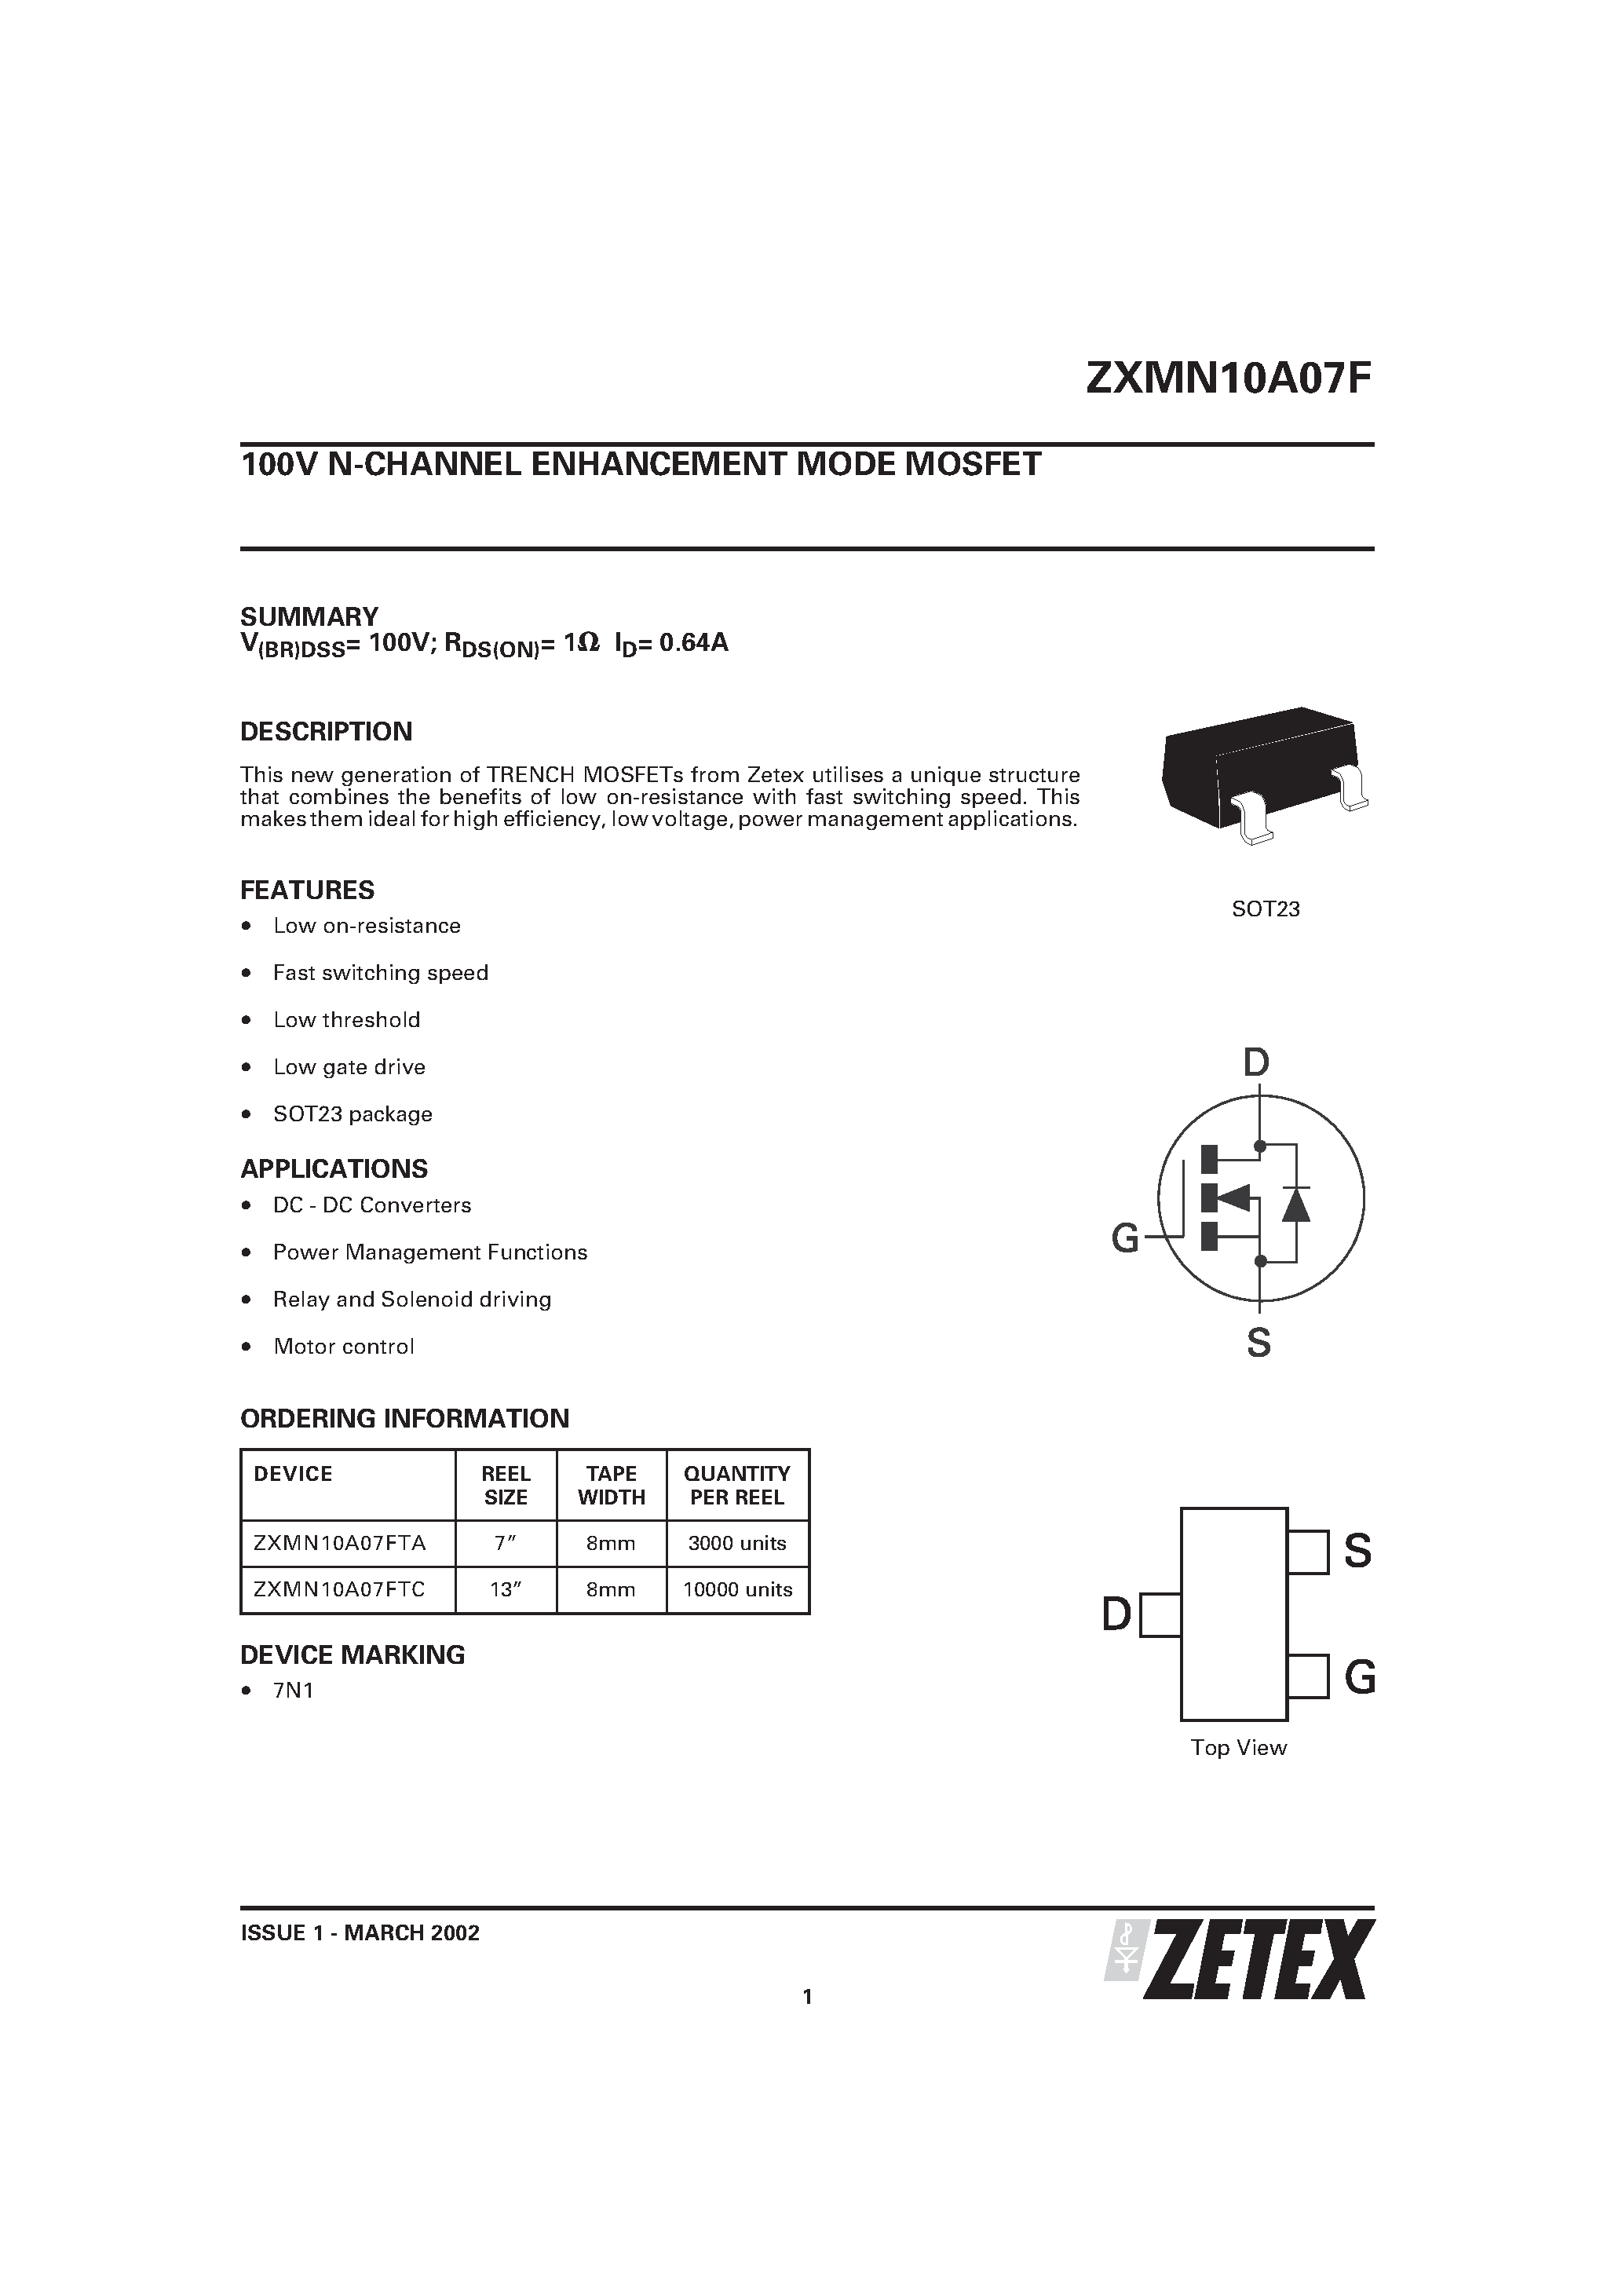 Datasheet ZXMN10A07F - 100V N-CHANNEL ENHANCEMENT MODE MOSFET page 1